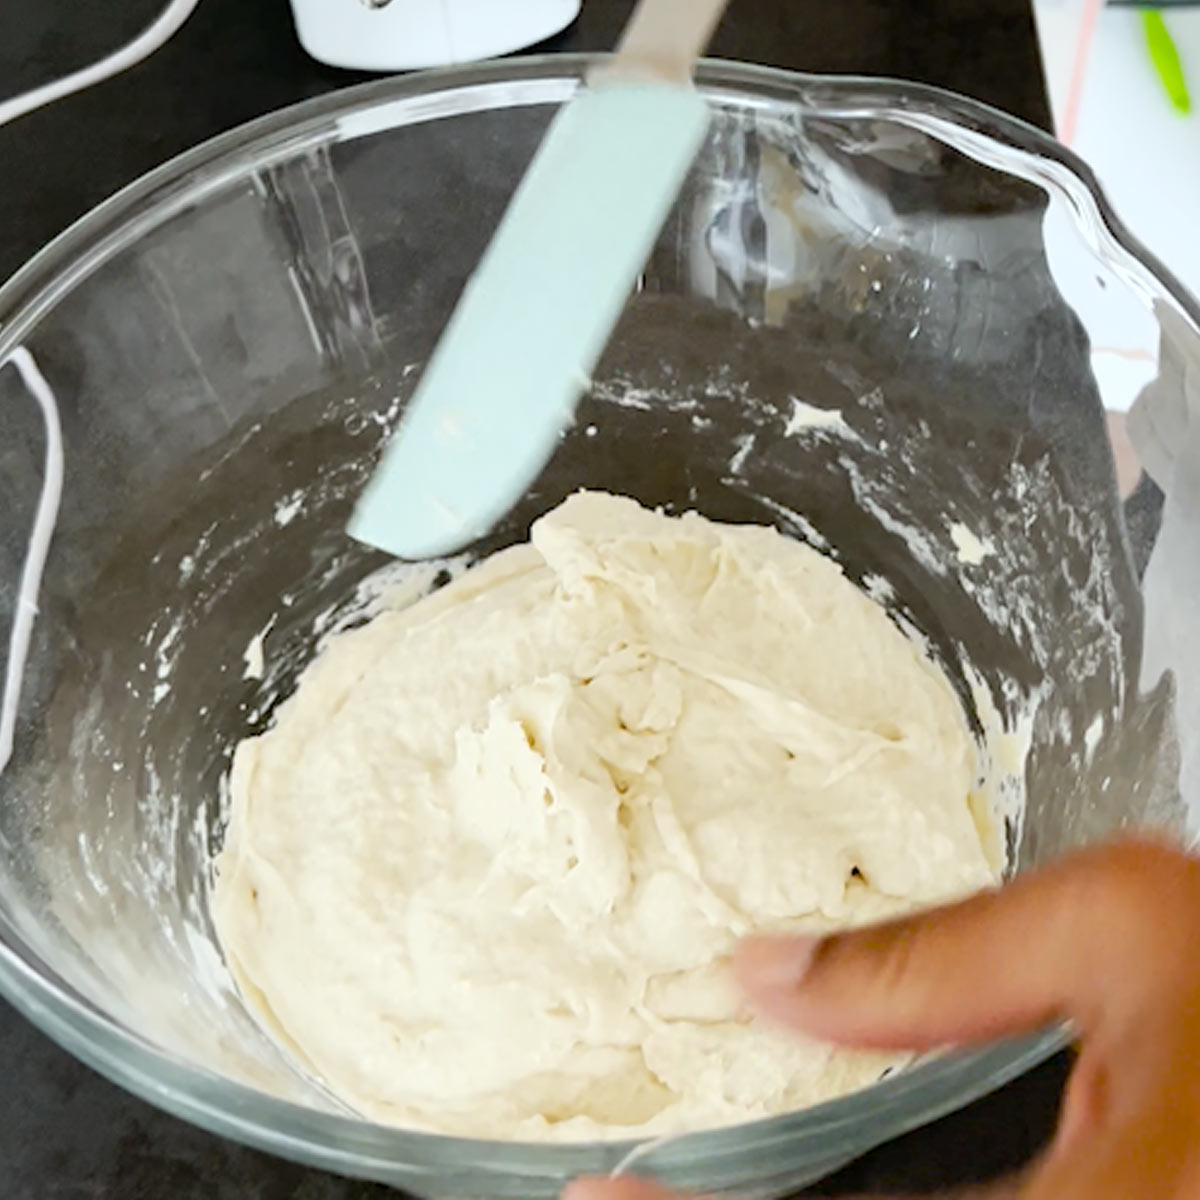 scrape the sides of your bowl to assemble the baguette dough in the center of the bowl